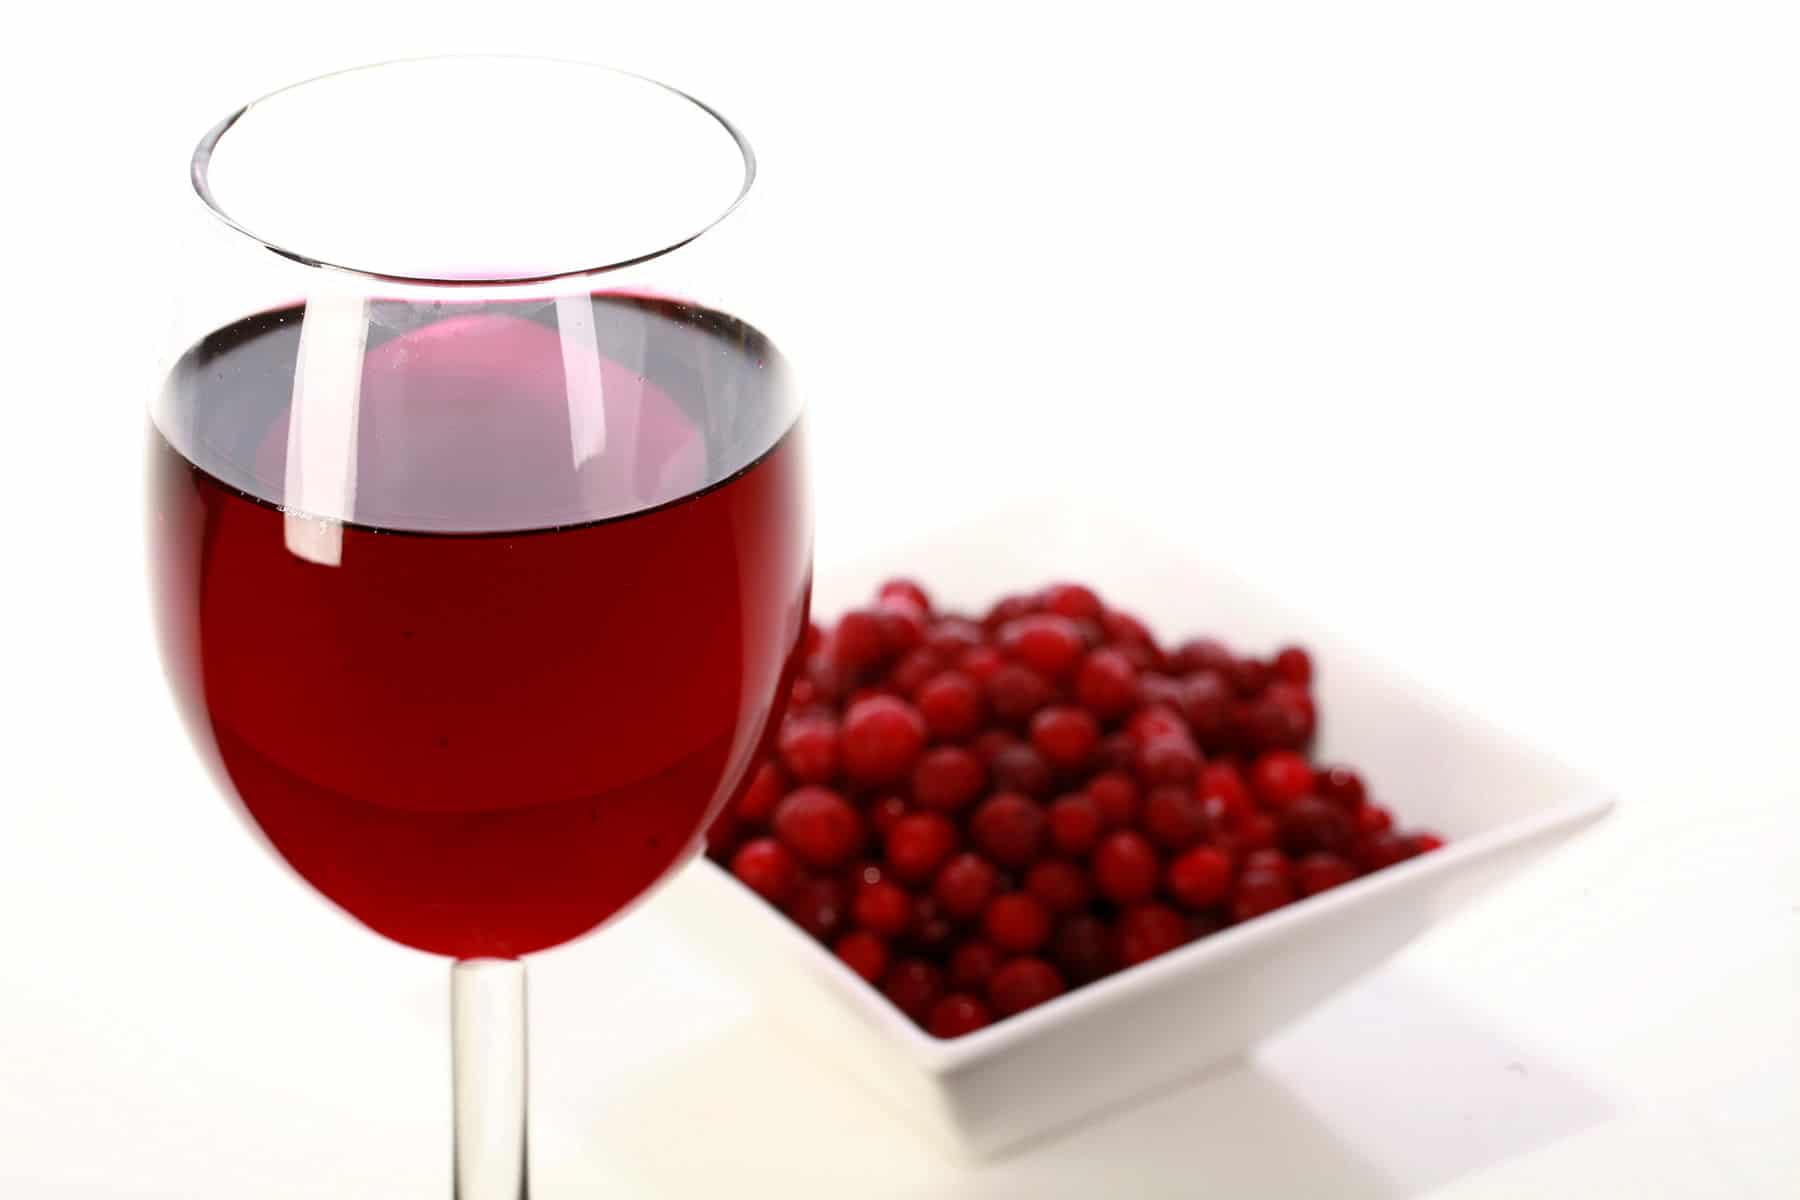 A glass of red wine - made from this partridgeberry wine recipe - is pictured next to a small bowl of partridgeberries.